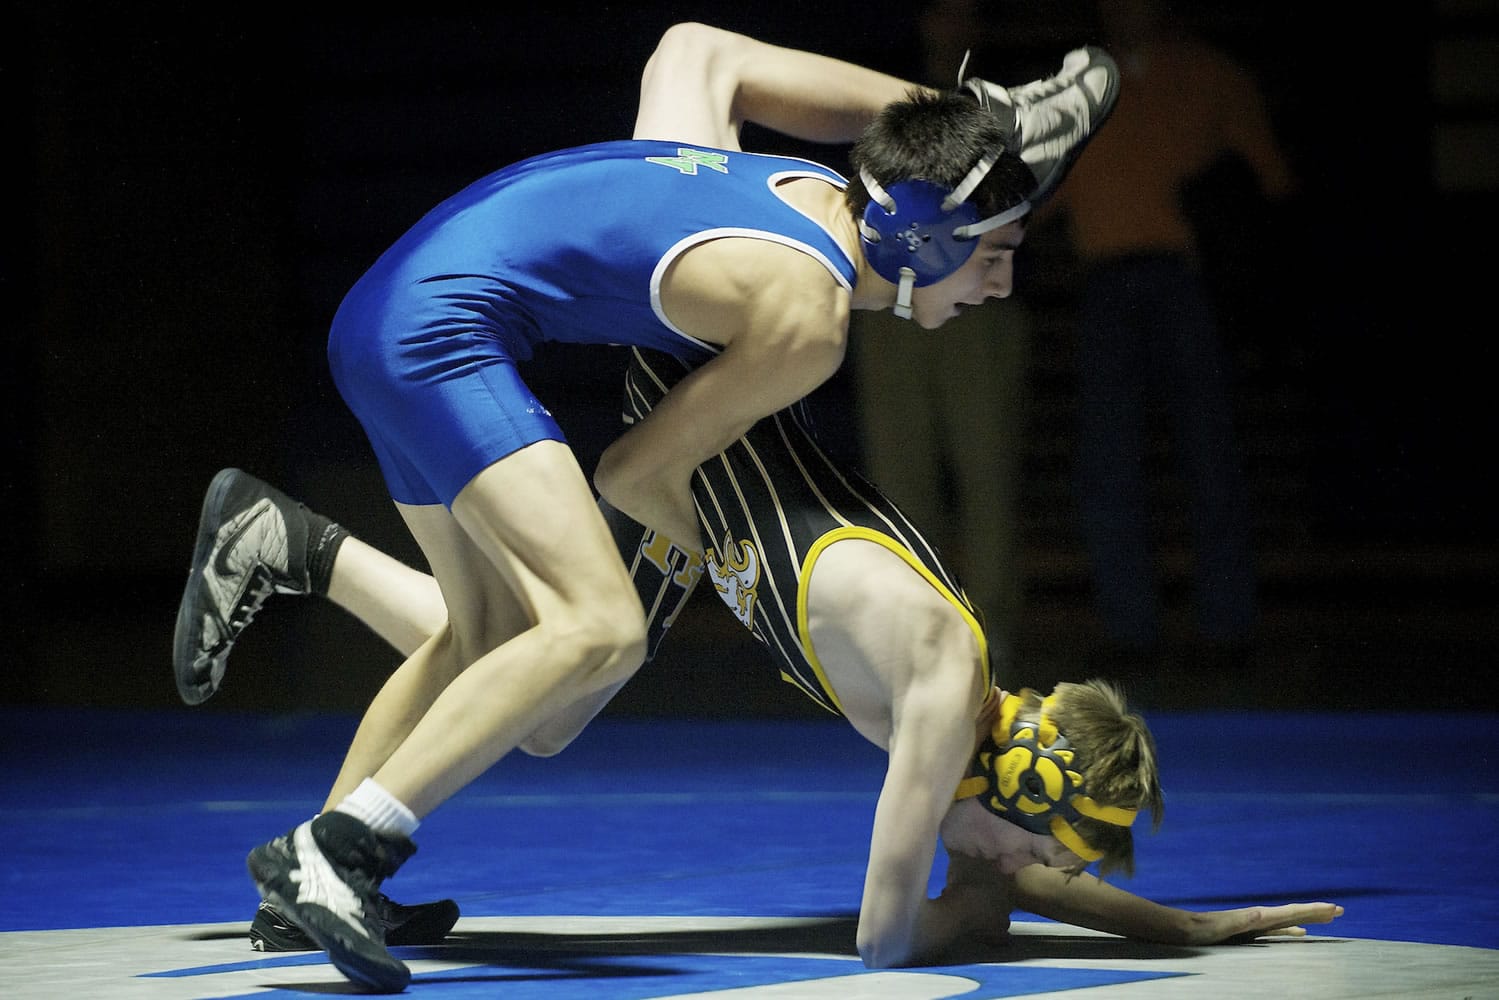 Ben Dixon of Mountain View High School takes down Tyler Hovis of Hudson's Bay during the 113 pound match Wednesday January 9, 2012 in Vancouver, Washington. Dixon pinned Hovis later in the match.